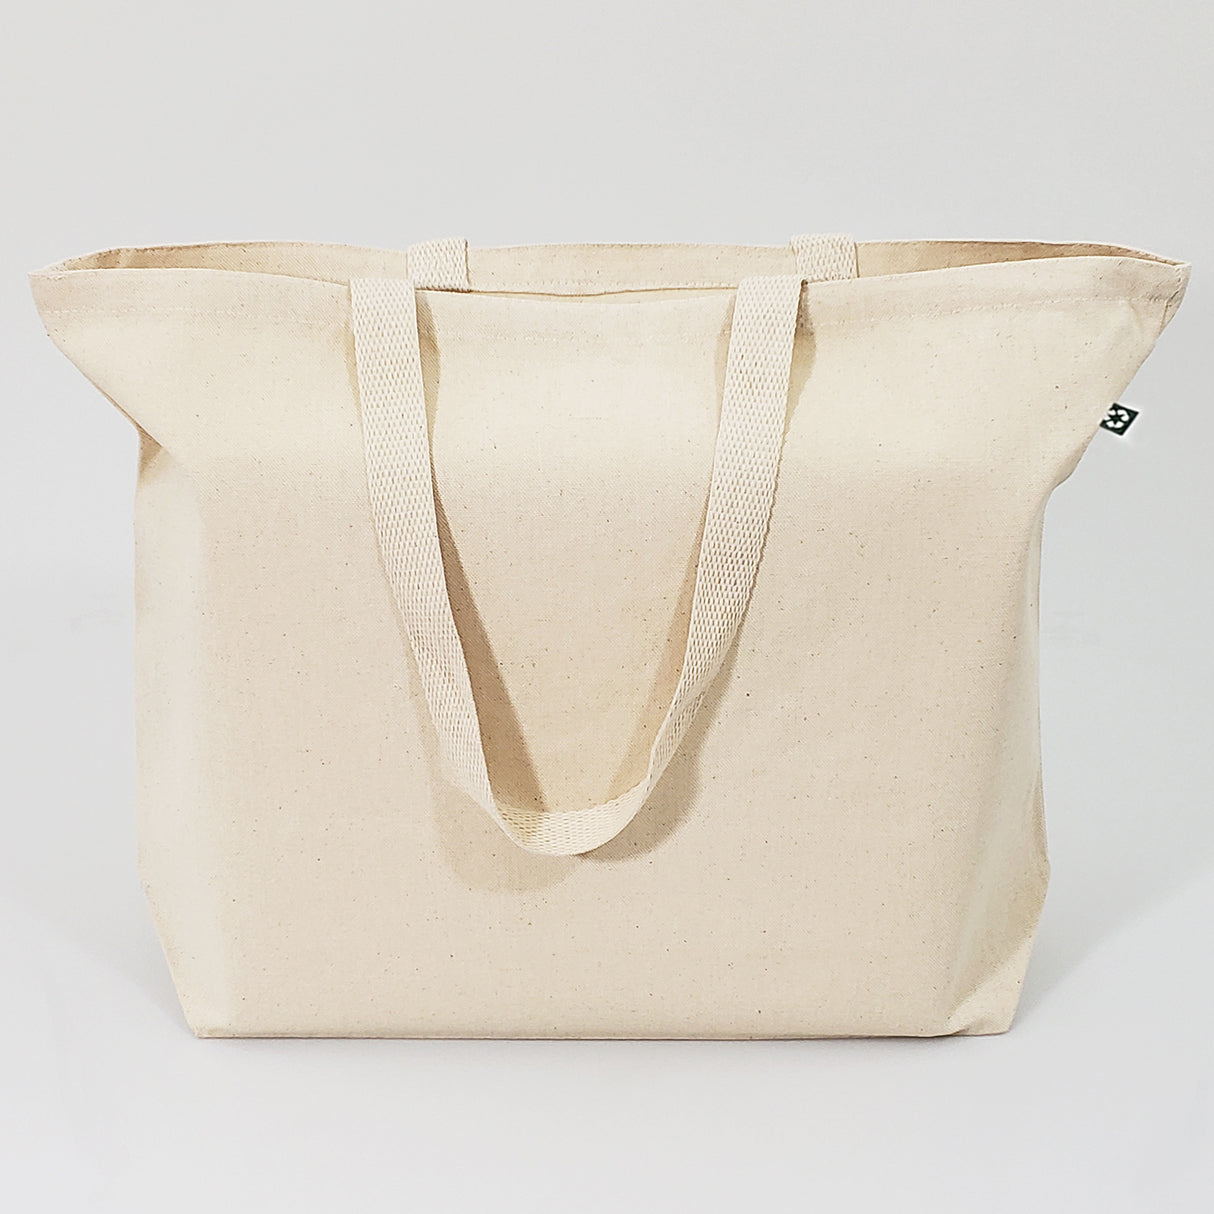 Large Recycled Canvas Tote Bags, Recycled Cotton bags, Recycled Canvas Bags